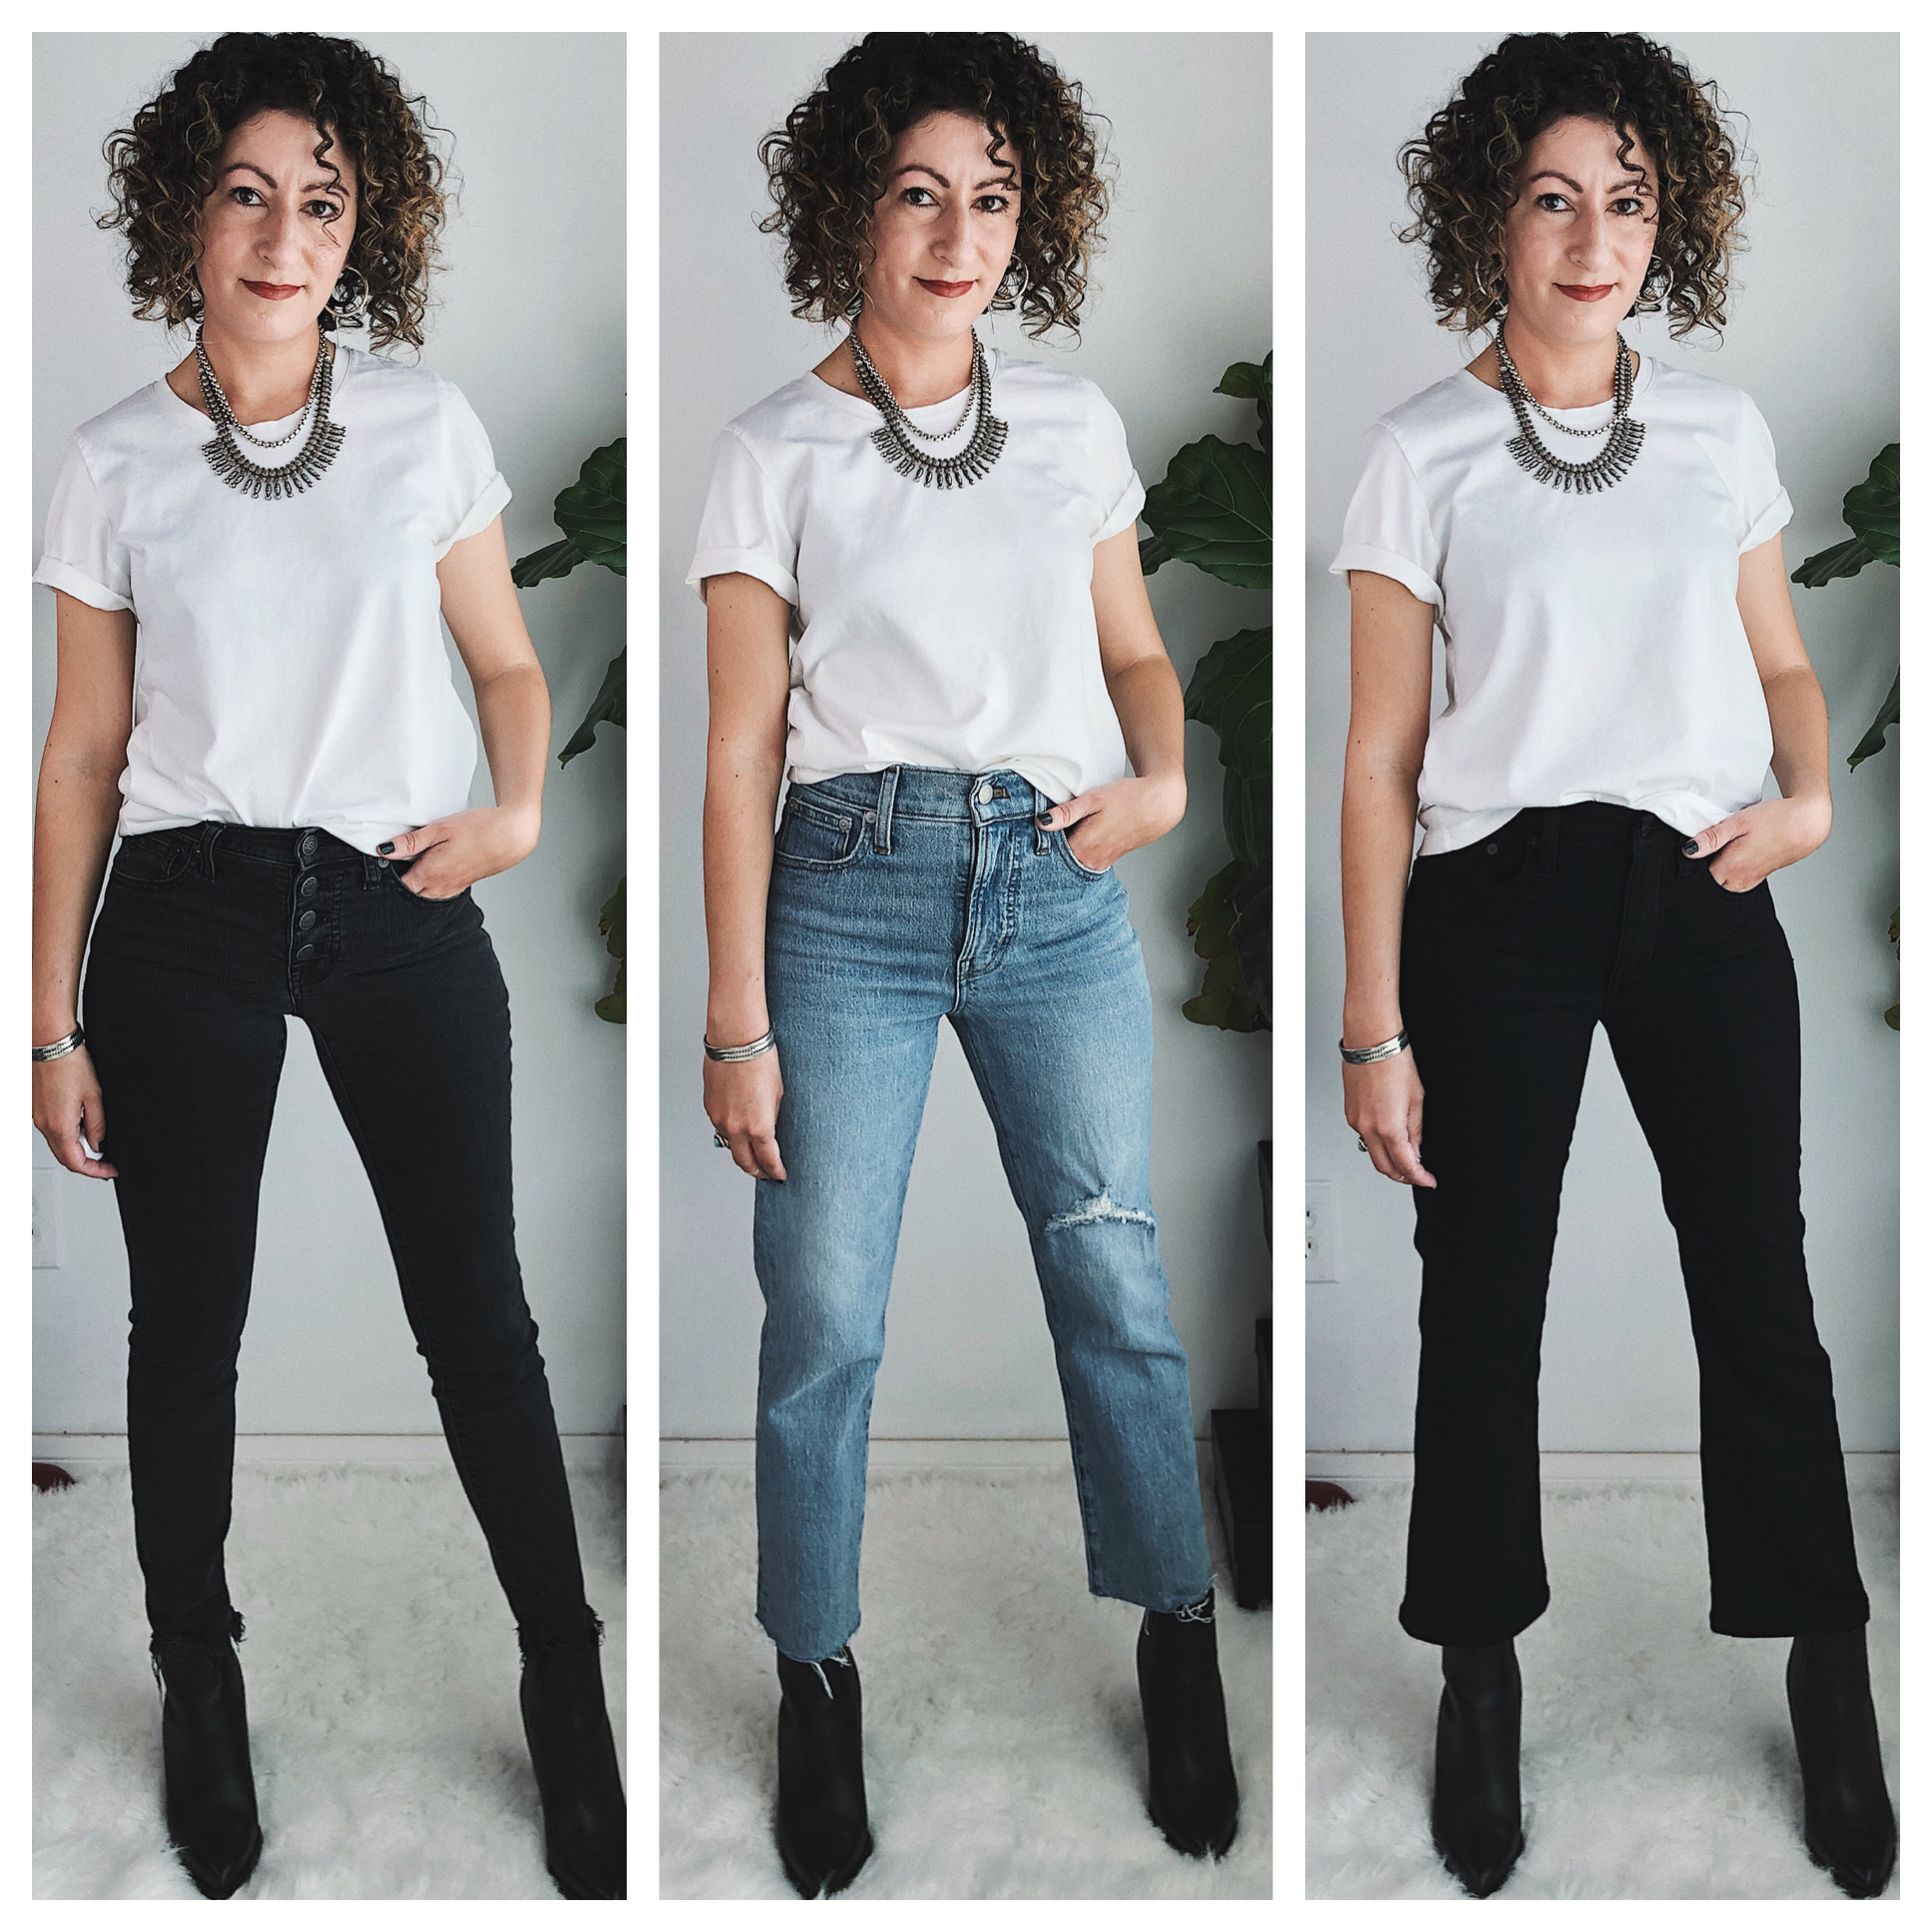 Madewell Petite Denim Review & Try-On: Skinny, Demi-Boot, & Perfect Vintage